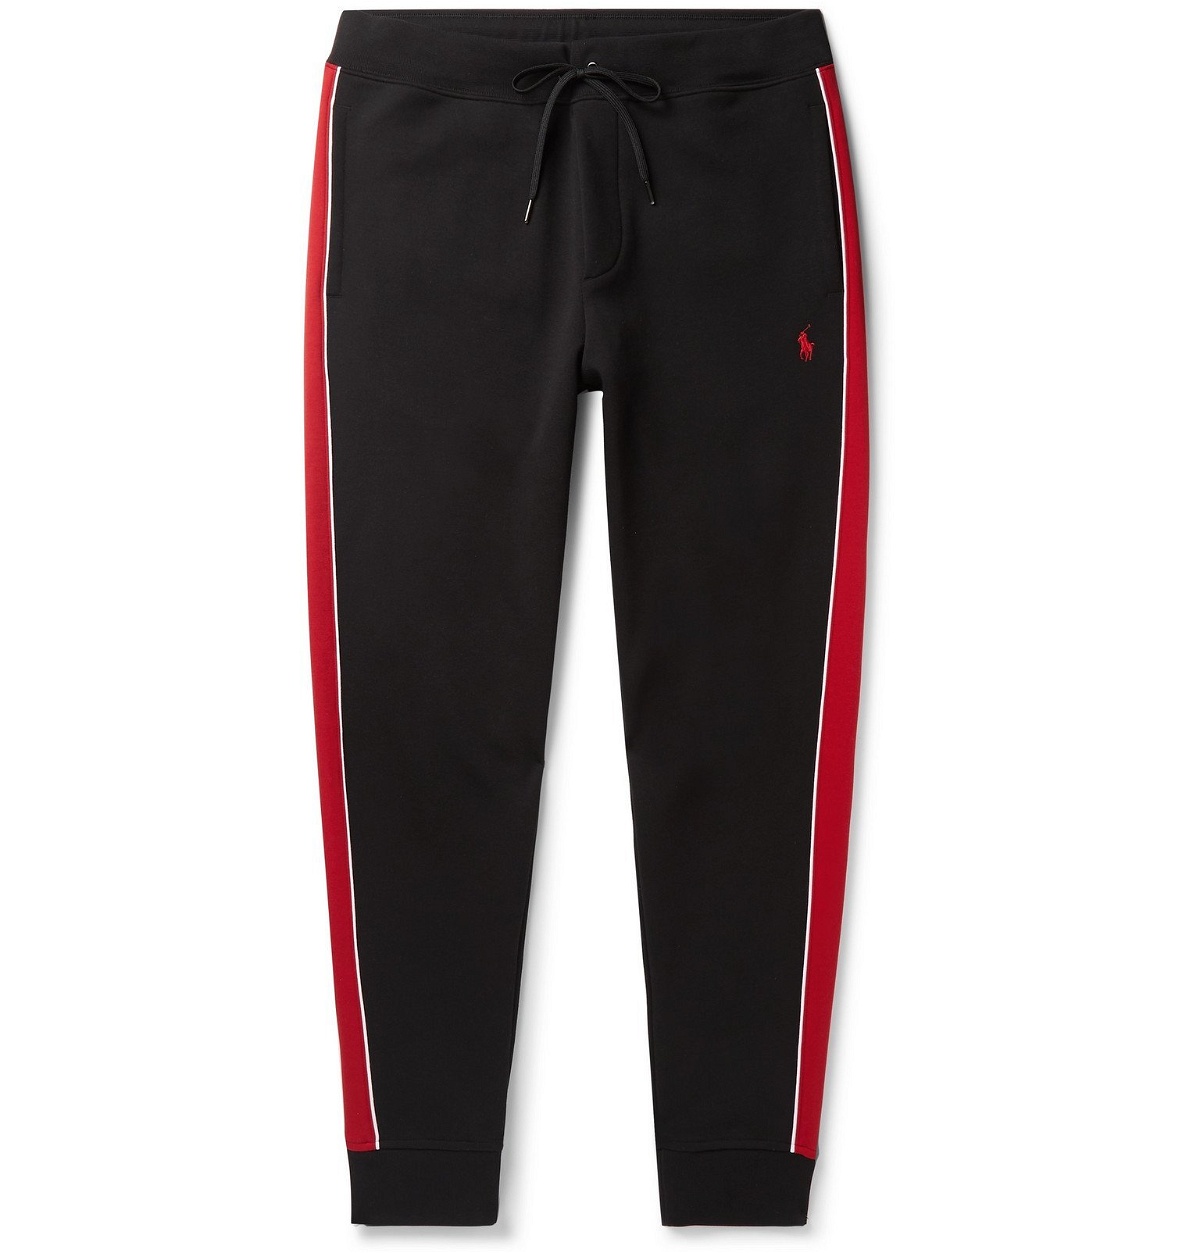 Polo Ralph Lauren - Tapered Striped Jersey Track Pants - Black